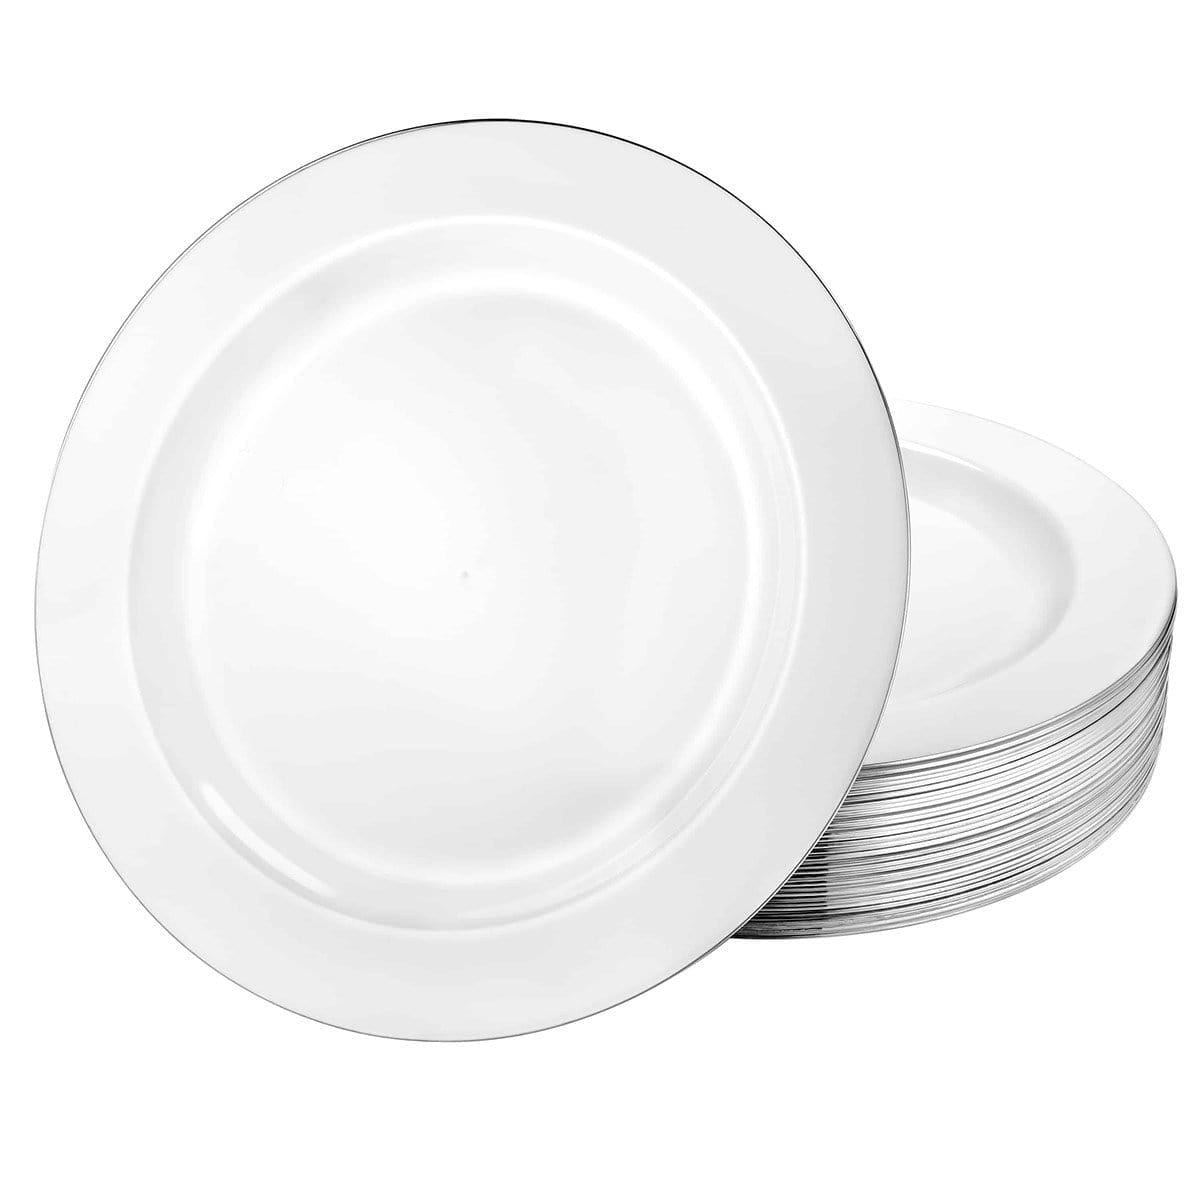 Buy Plasticware Round Plate 10In., White & Silver, 10 Count sold at Party Expert